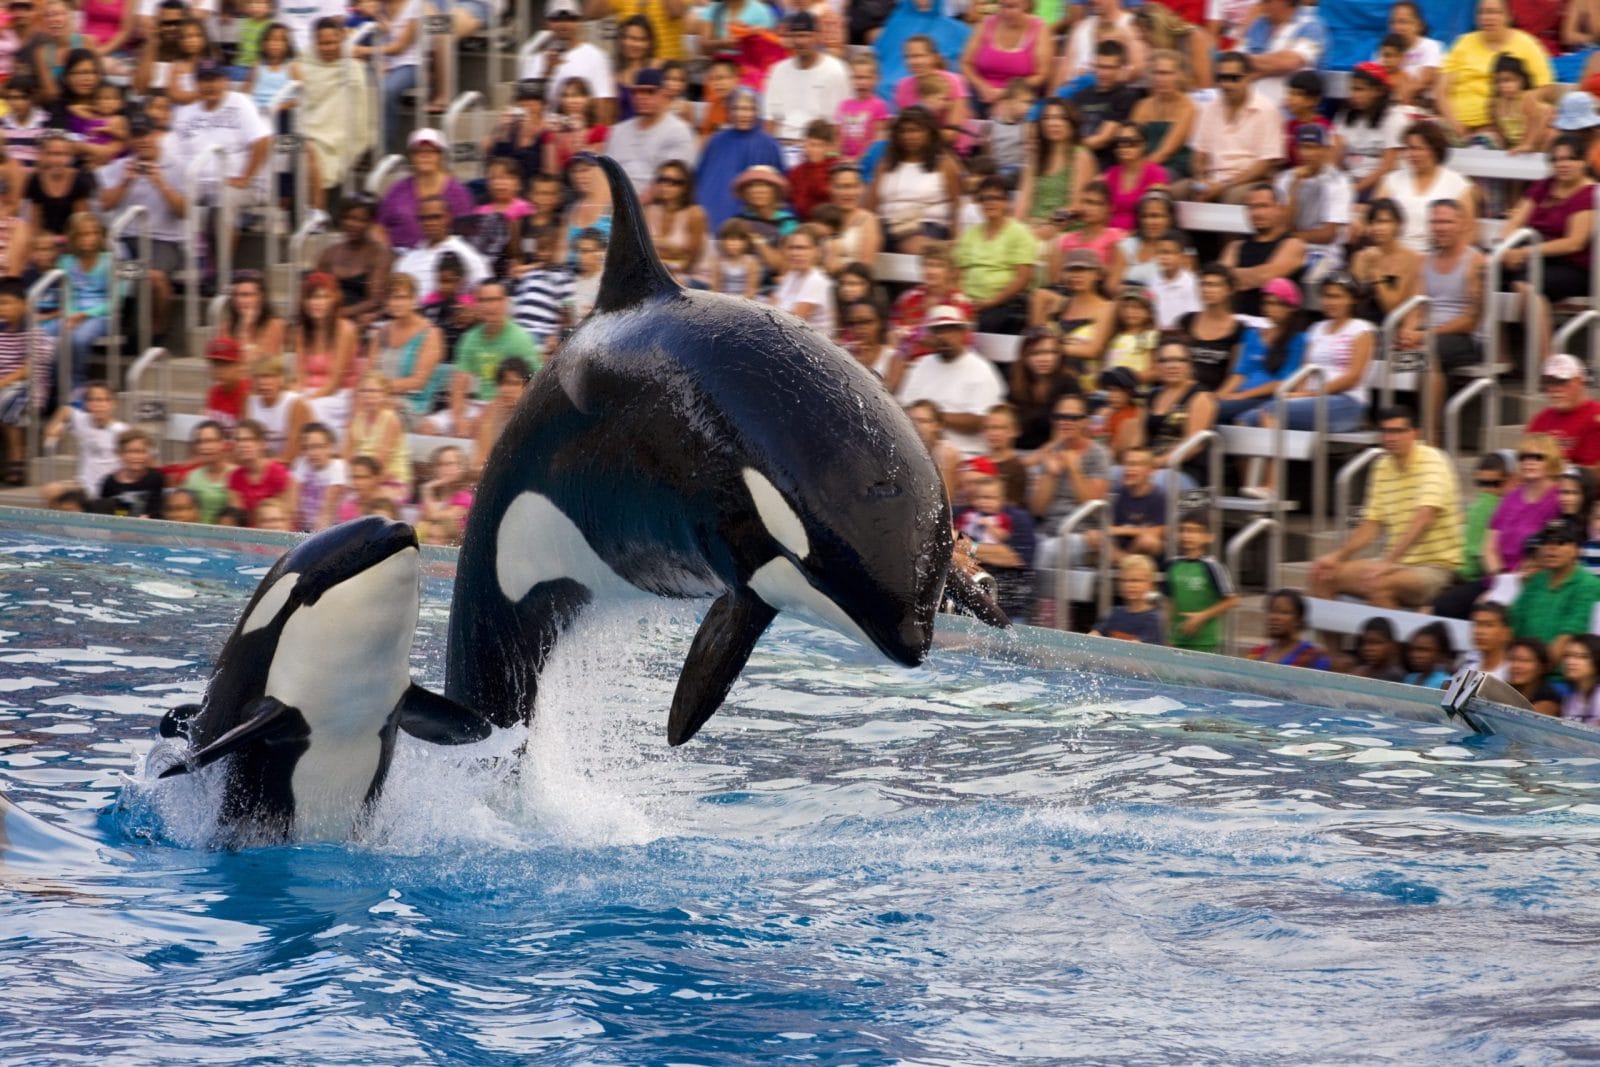 Two orcas swimming together at SeaWorld